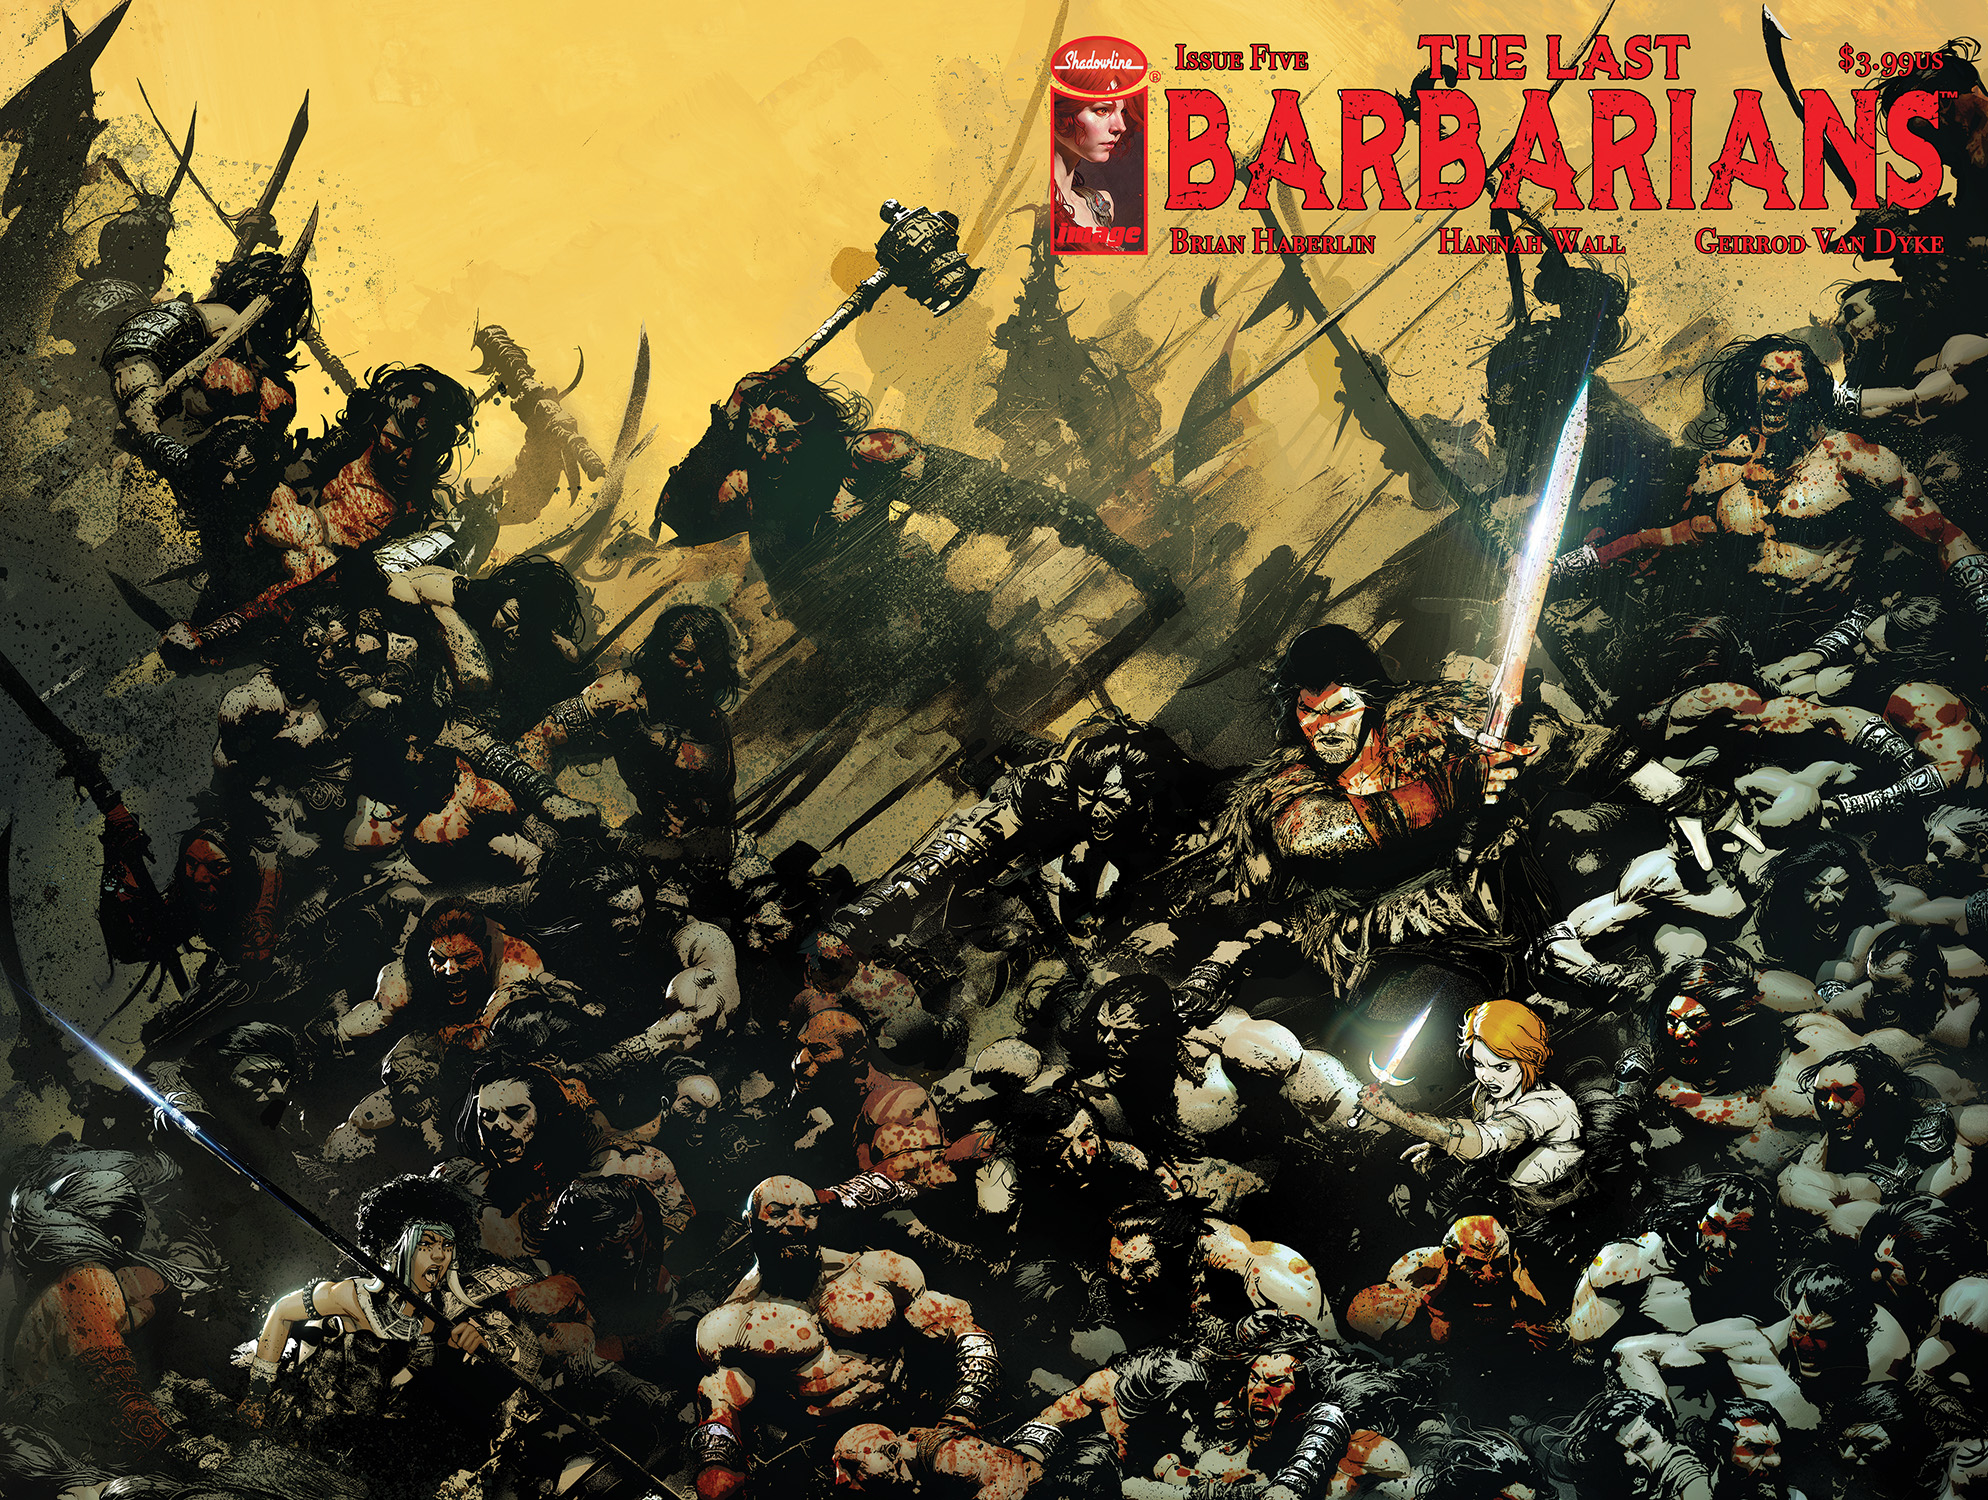 Last Barbarians #5 Cover C Haberlin (Of 5)